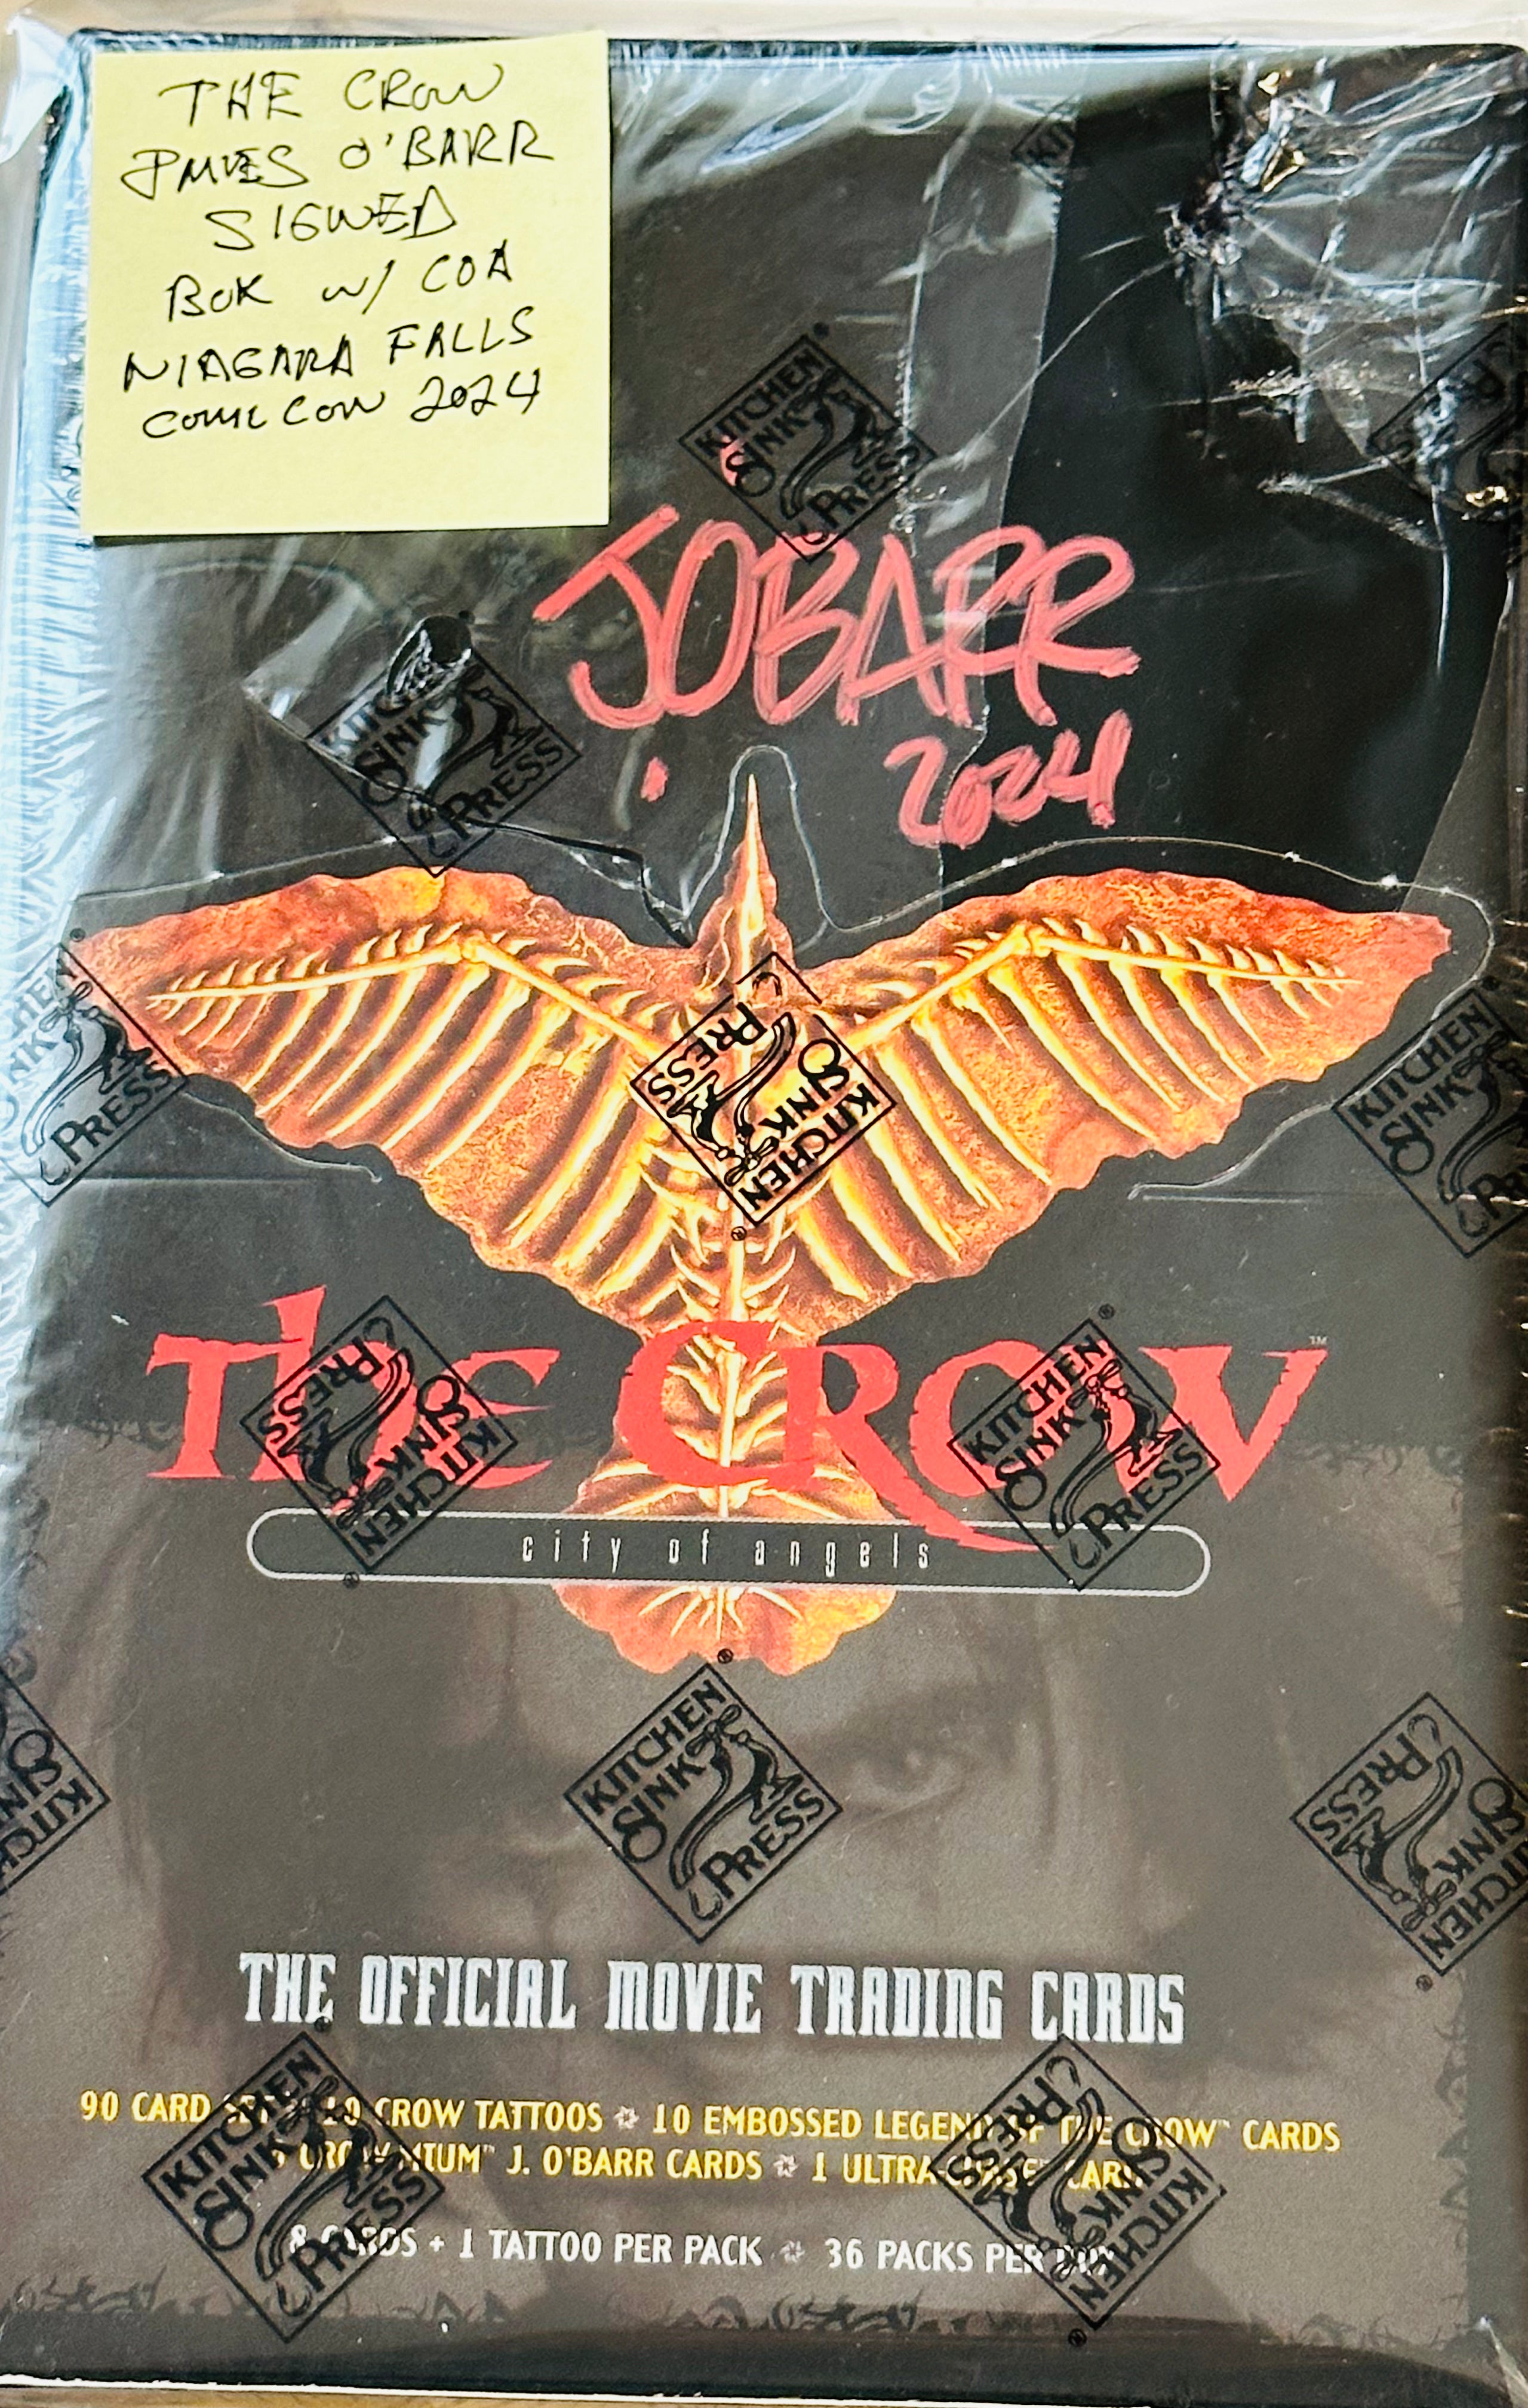 The Crow movie trading cards factory sealed box autographed by the creator, James Obar soldier certificate of authenticity